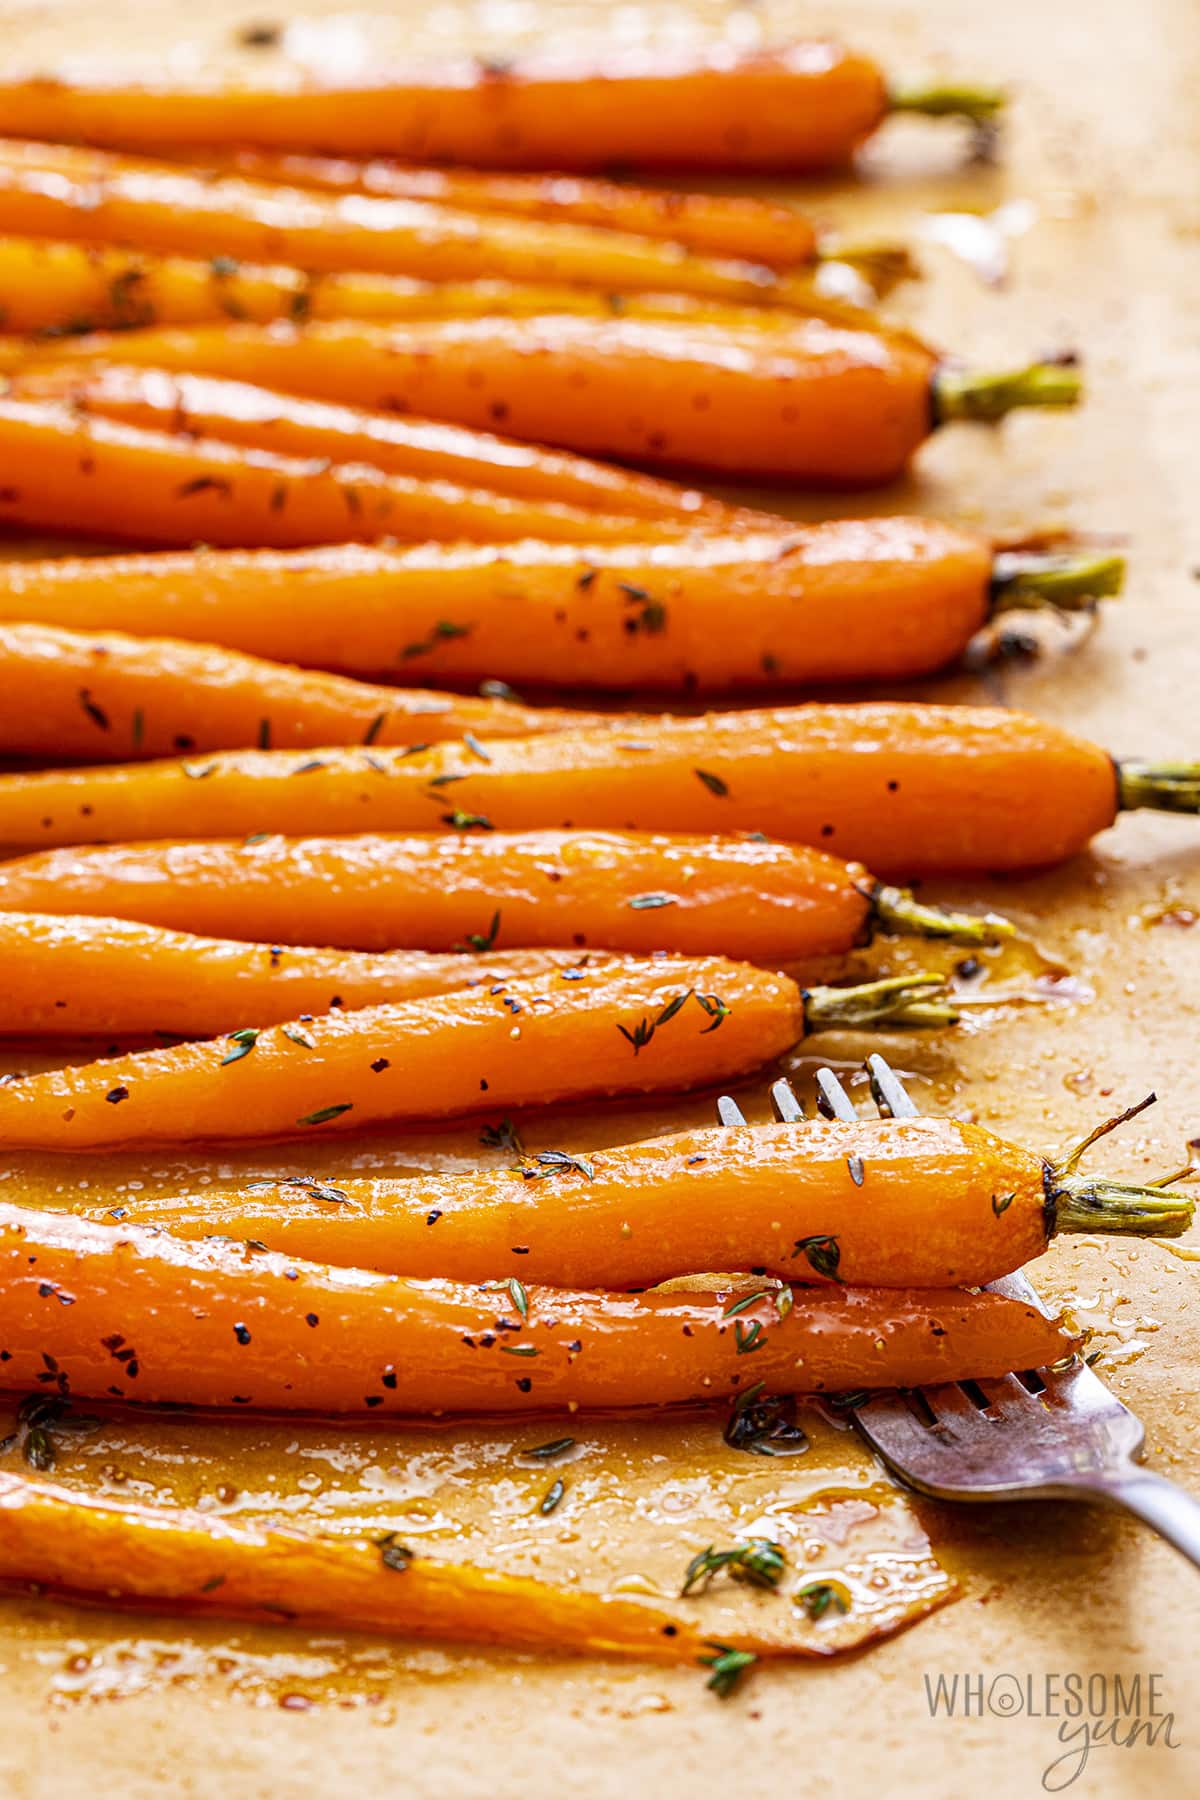 Place the carrots on a sheet pan and roast in the oven.